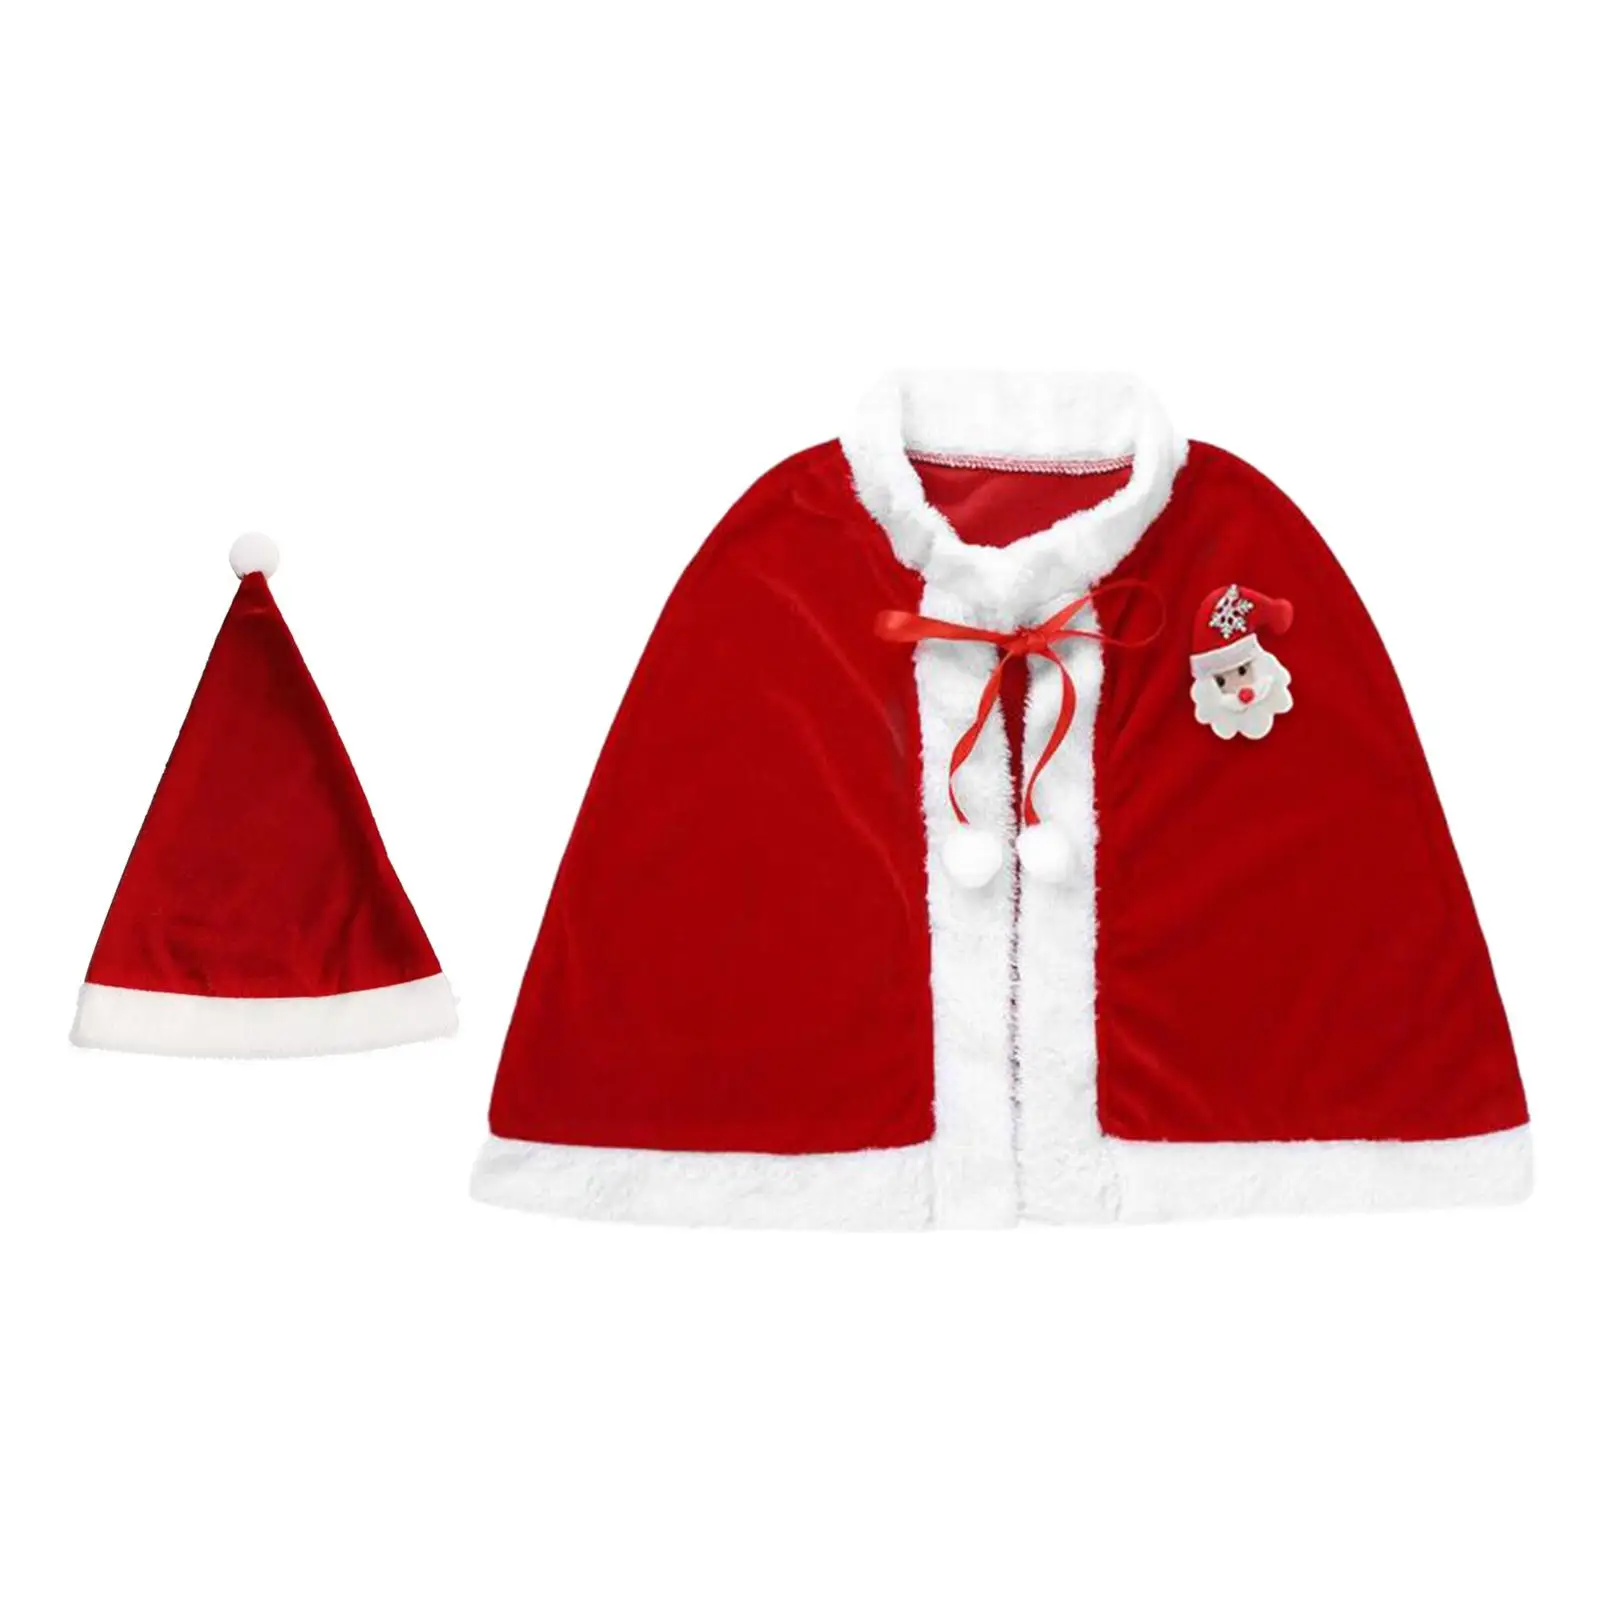 Kids Christmas Cloak Children Cape for Dressing up Roles Play Themed Party